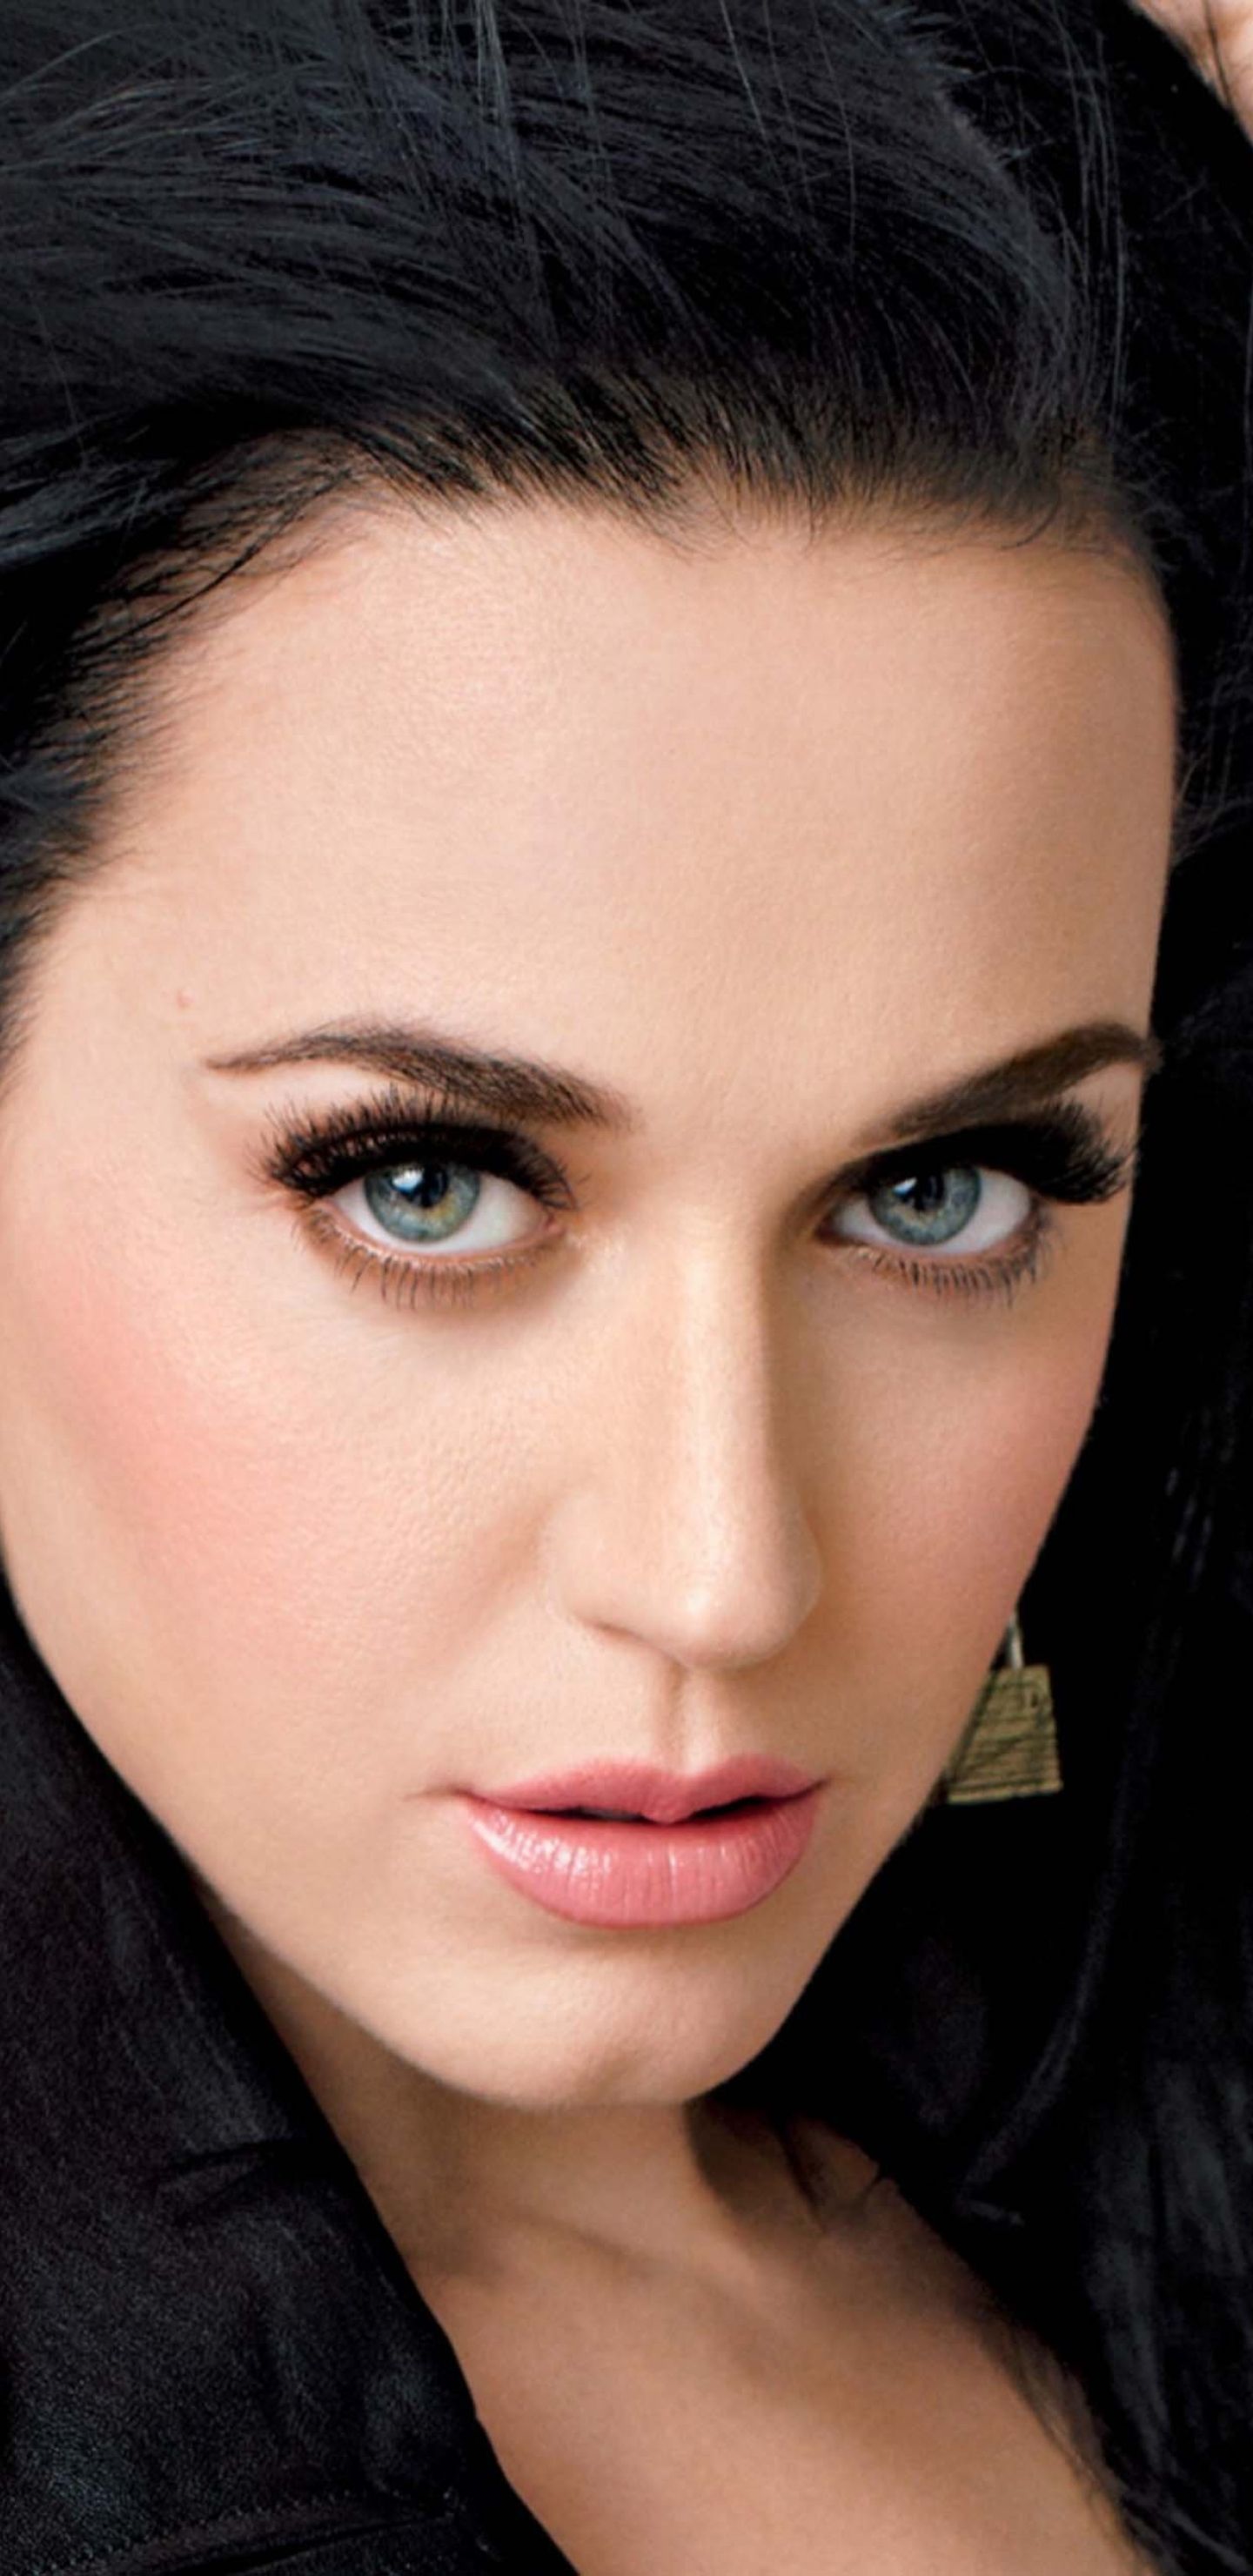 Katy Perry Face And Eyes Samsung Galaxy Note S S8